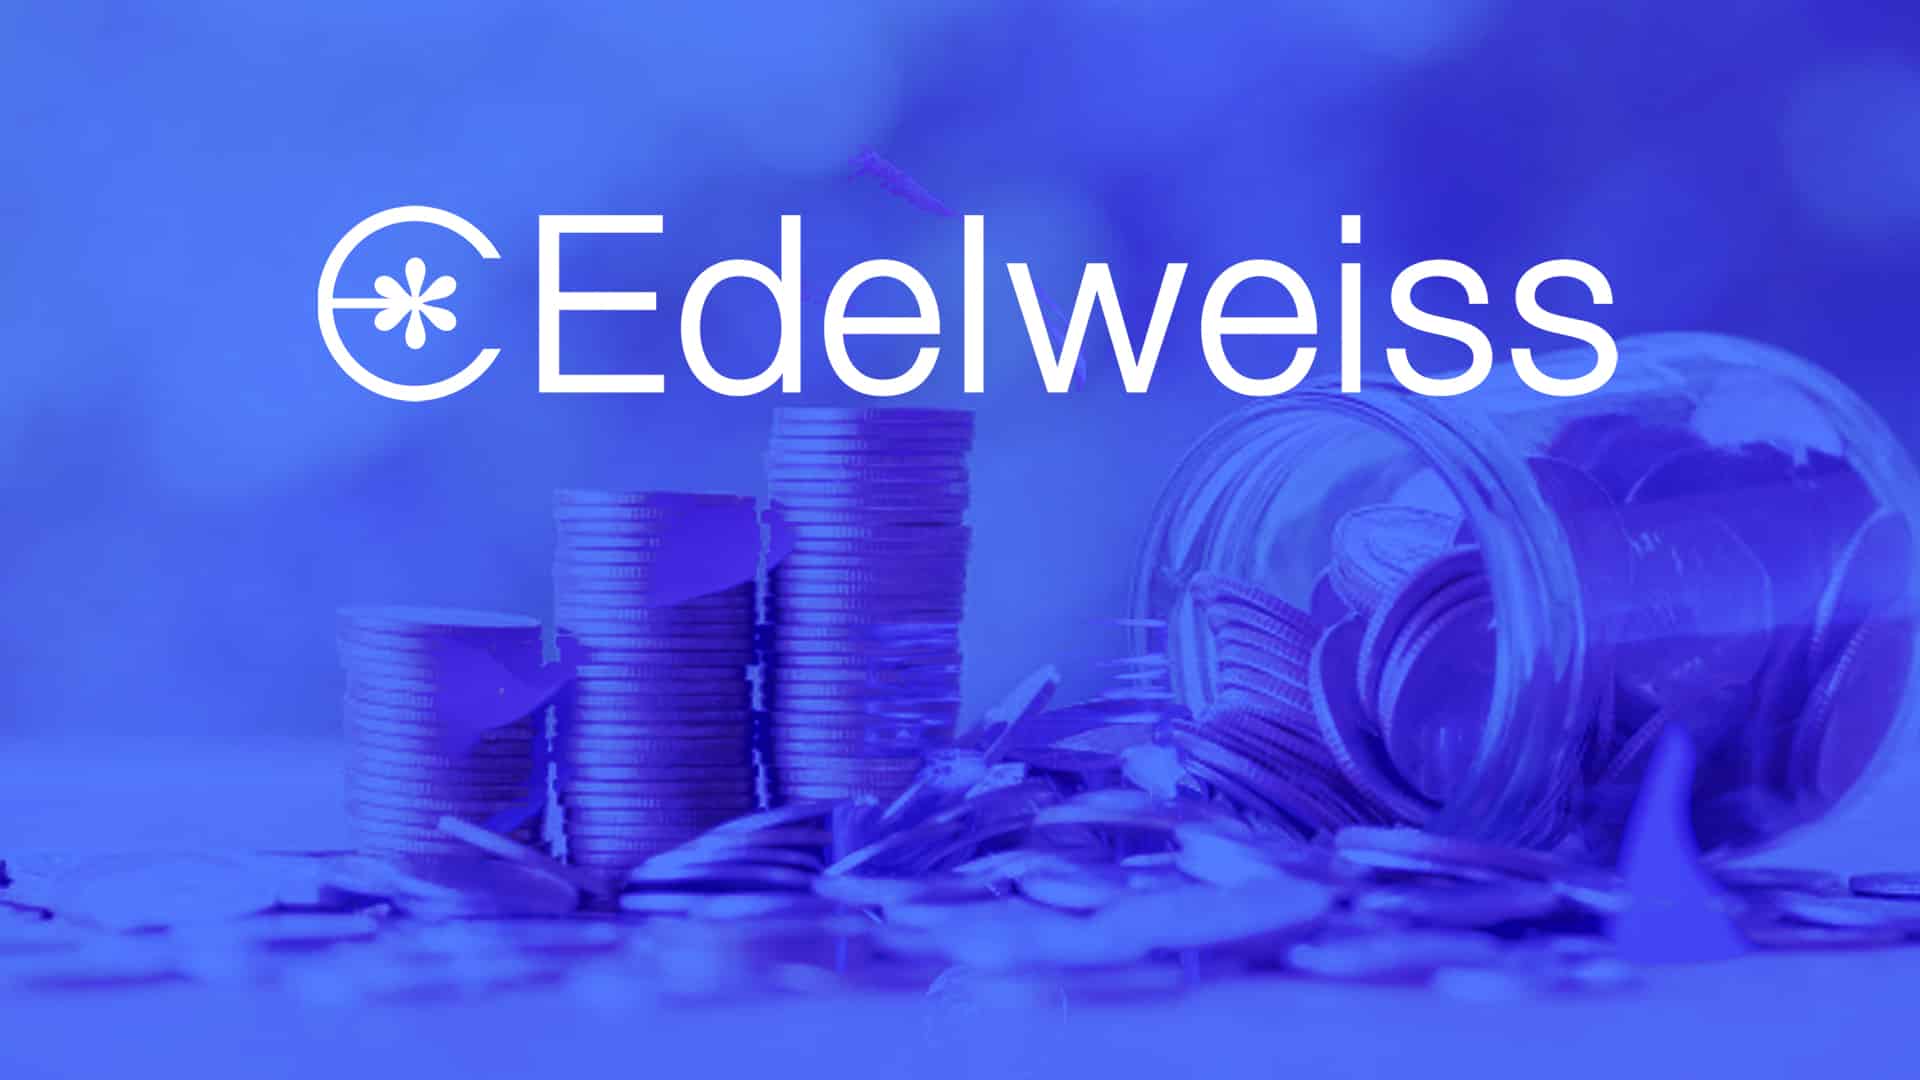 Edelweiss Financial Services' board approves fundraising up to Rs 1,000 cr via NCDs